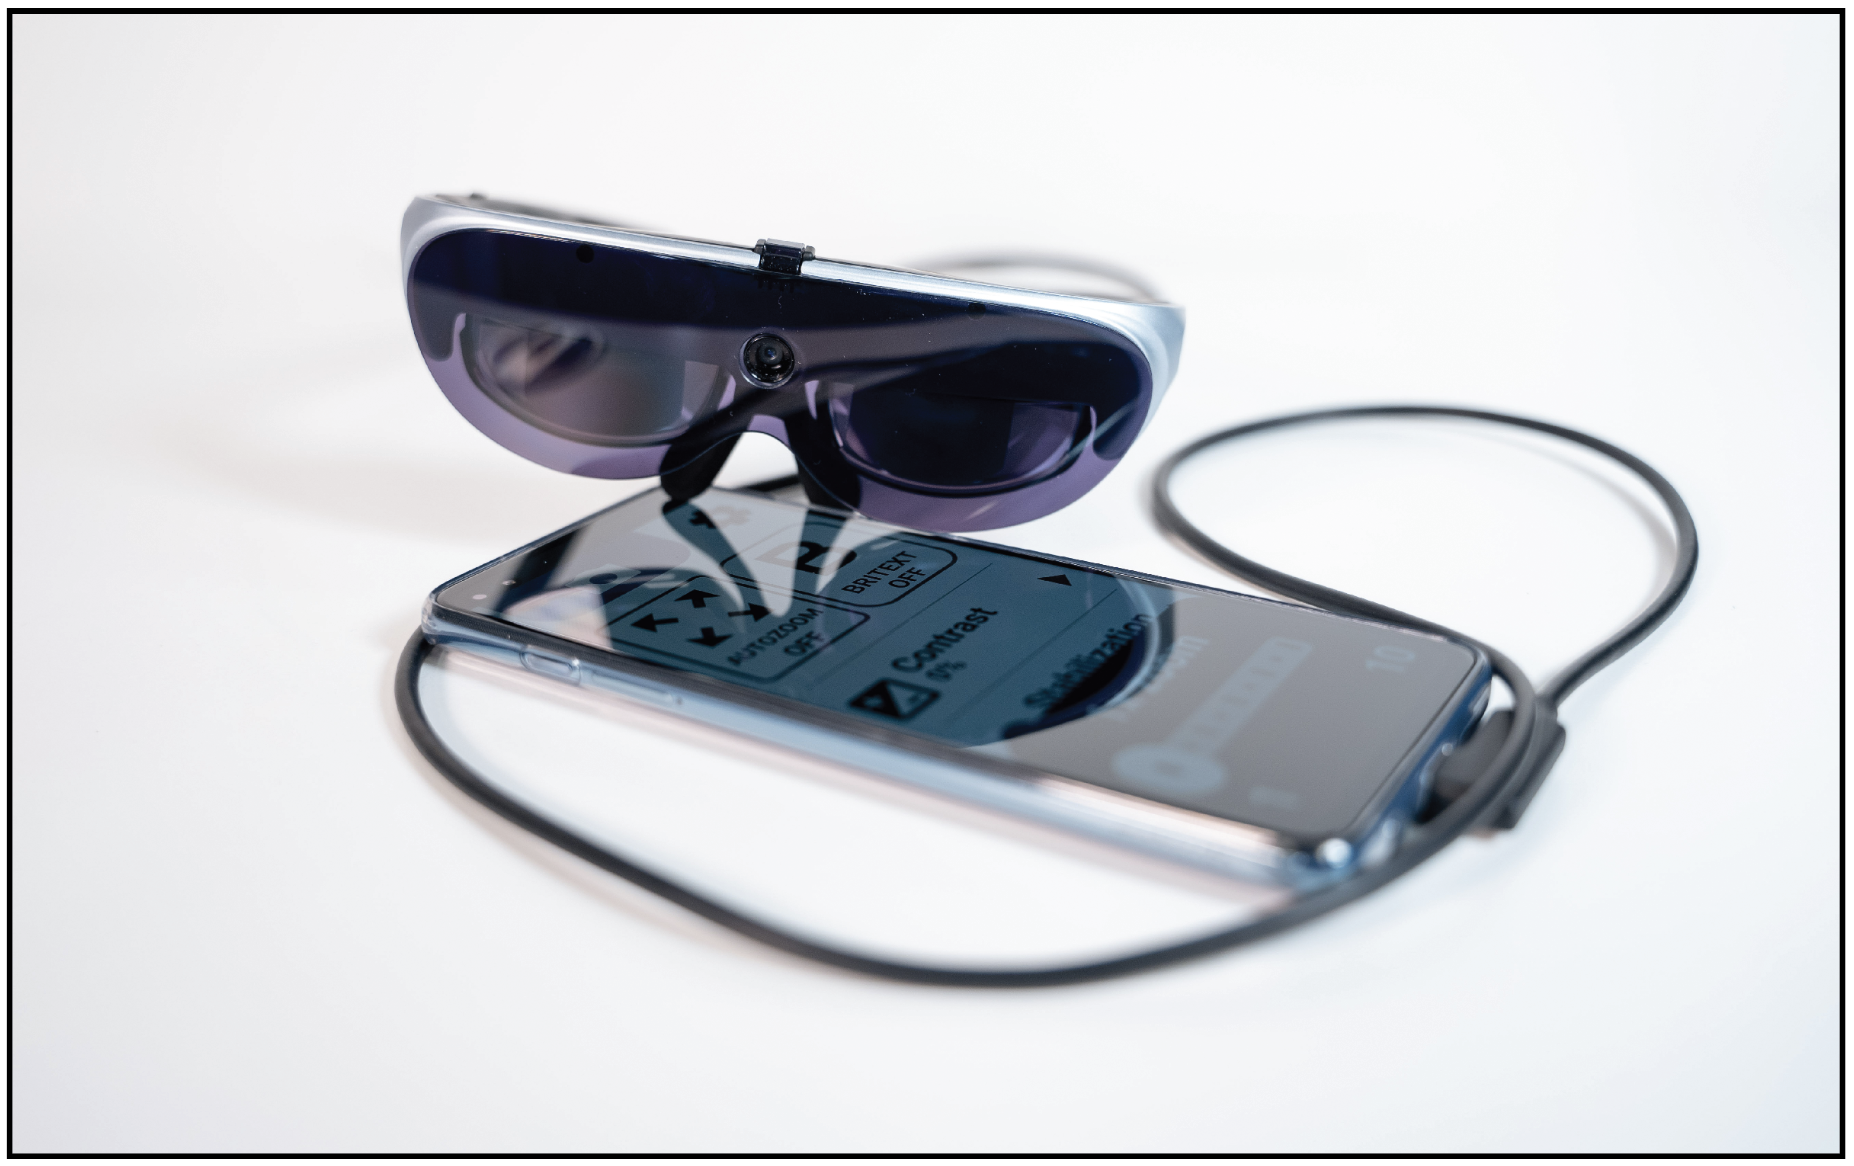 Eyedaptic’s glasses enhance vision for those with low vision diseases such as AMD and diabetic retinopathy.